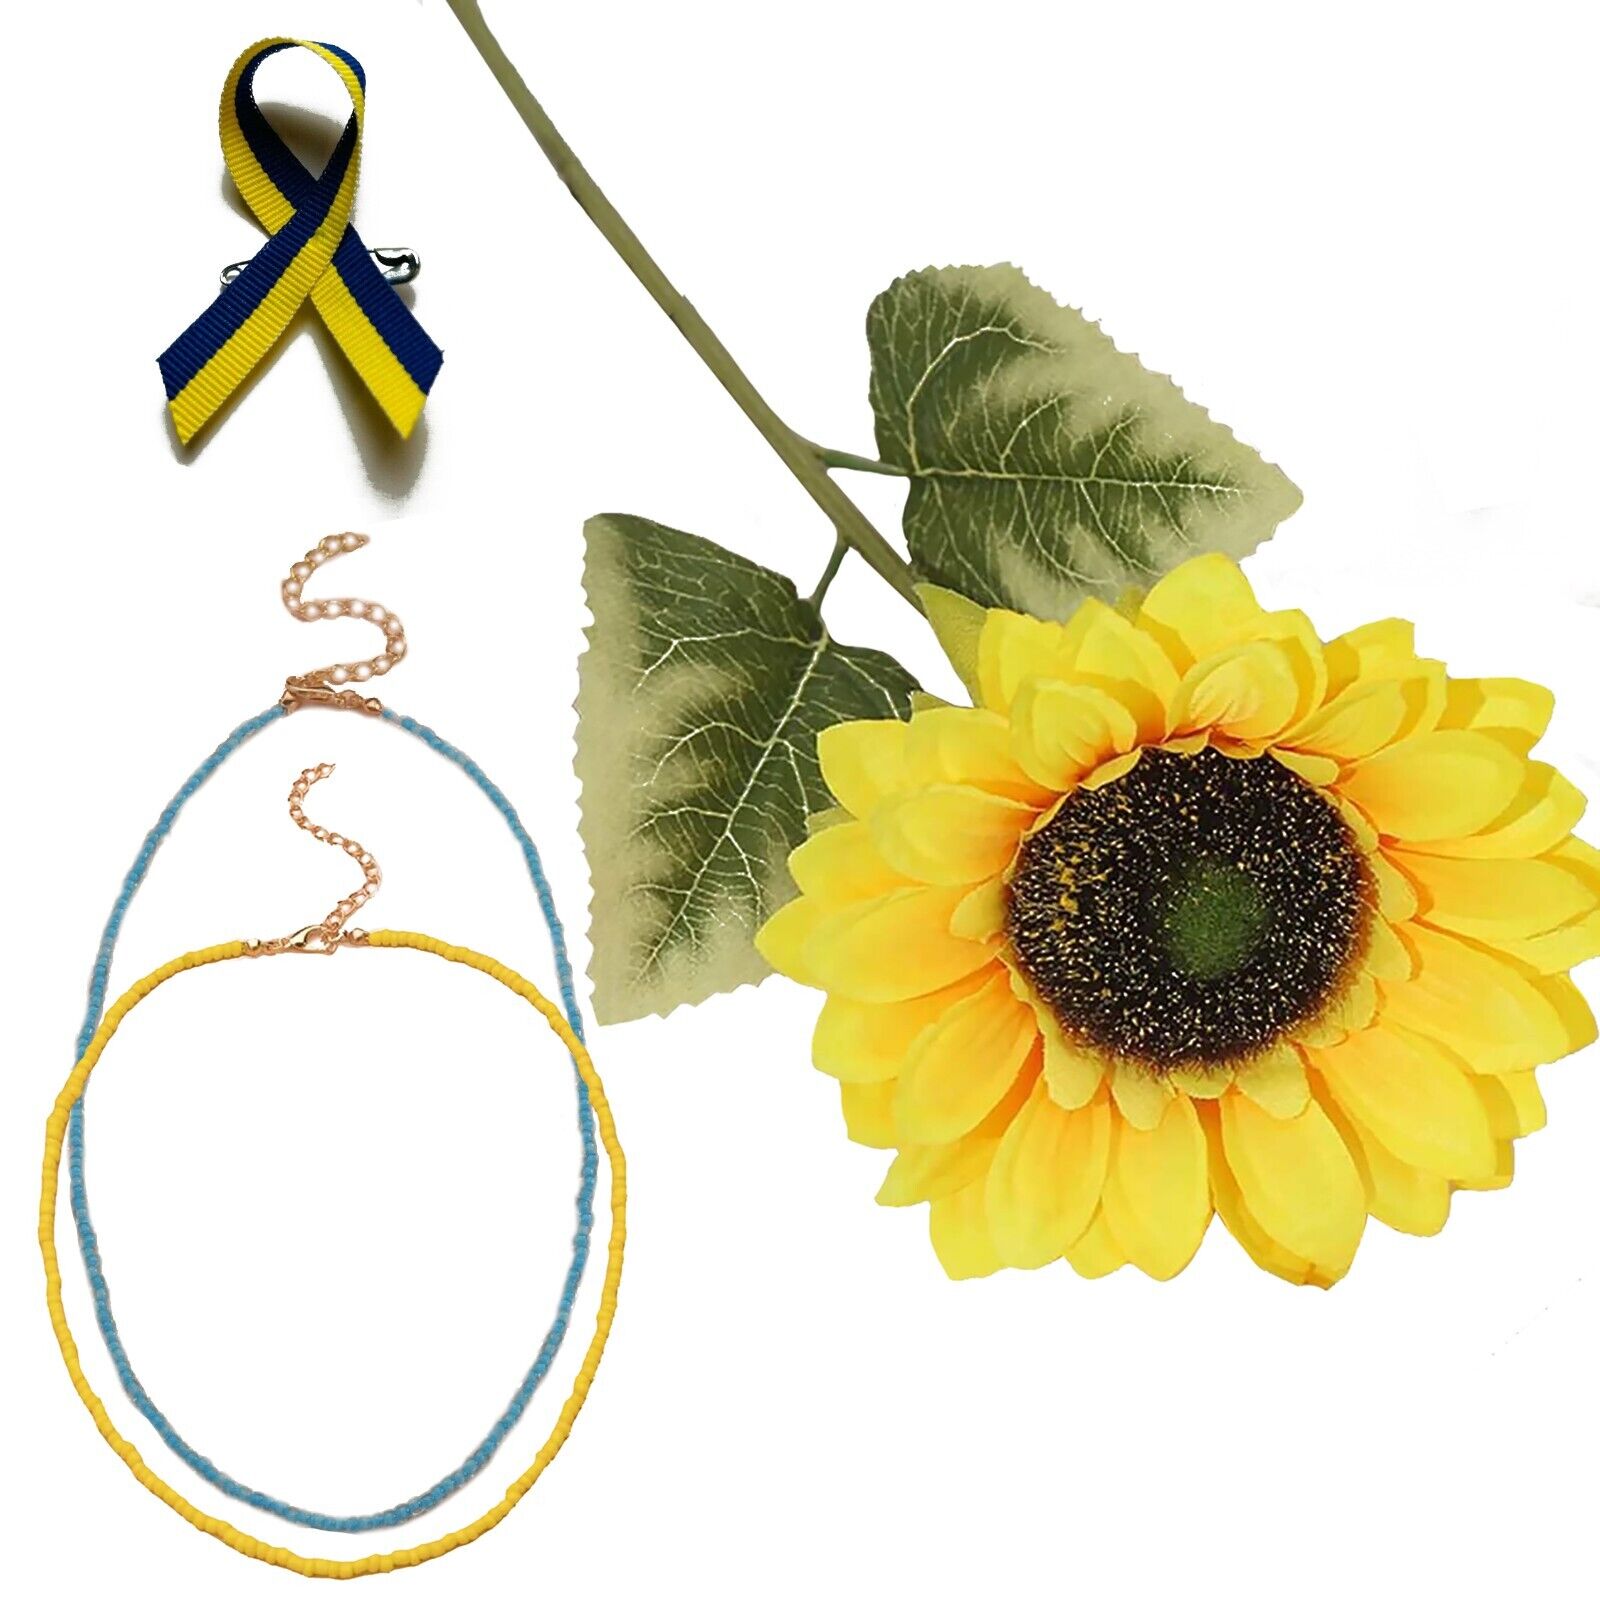 Ukraine Support Set Necklace Sunflower Flag Solidarity Ribbon Brooch Stand With